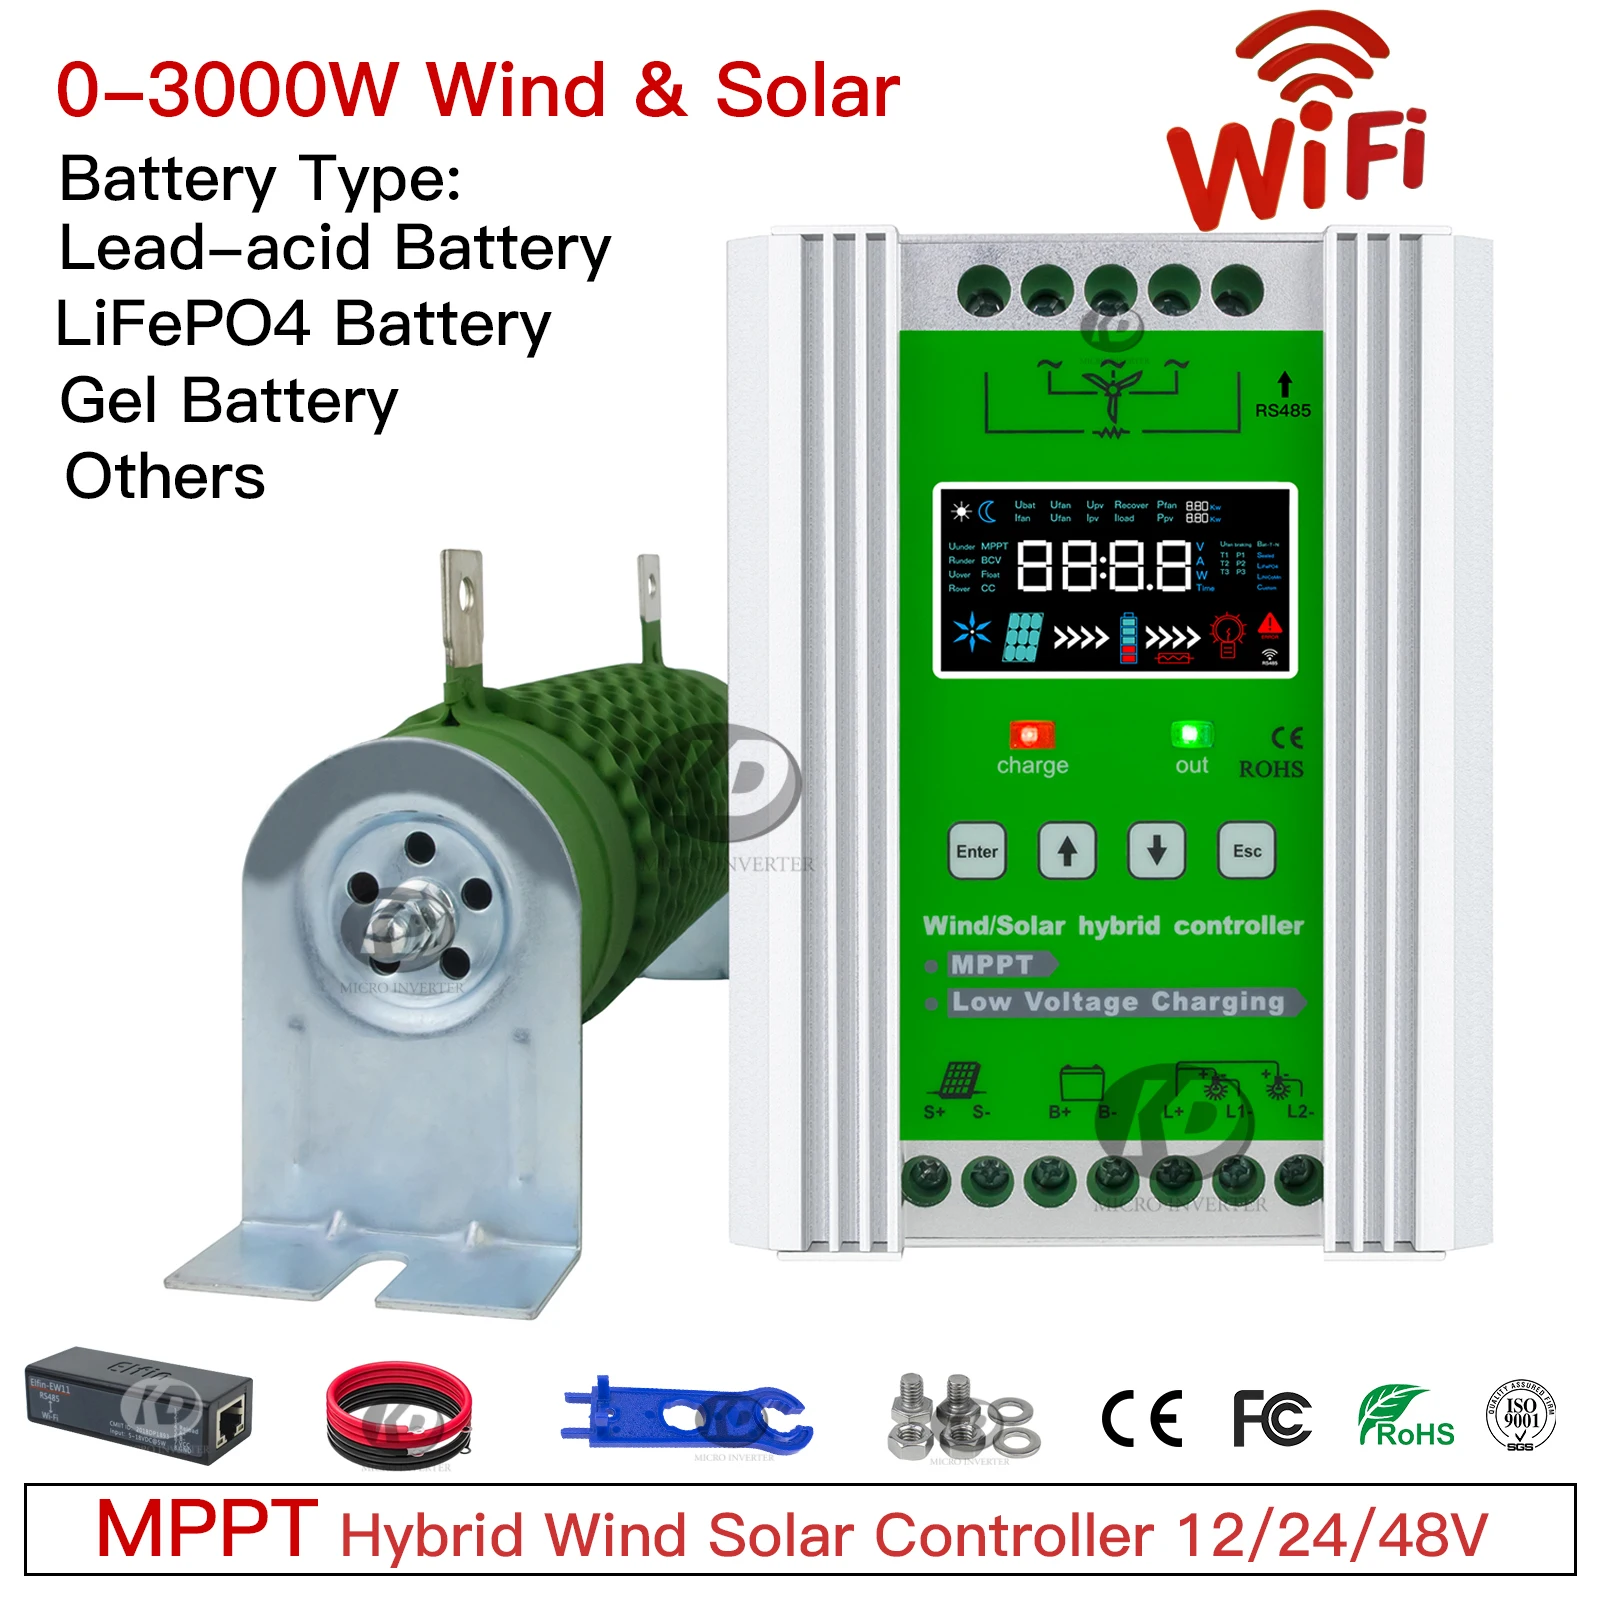 

MPPT 3000W Hybrid Wind Solar Charge Dischage Booster Controller Regulator With Dump Load For 1500W Wind Generator Solar Panel